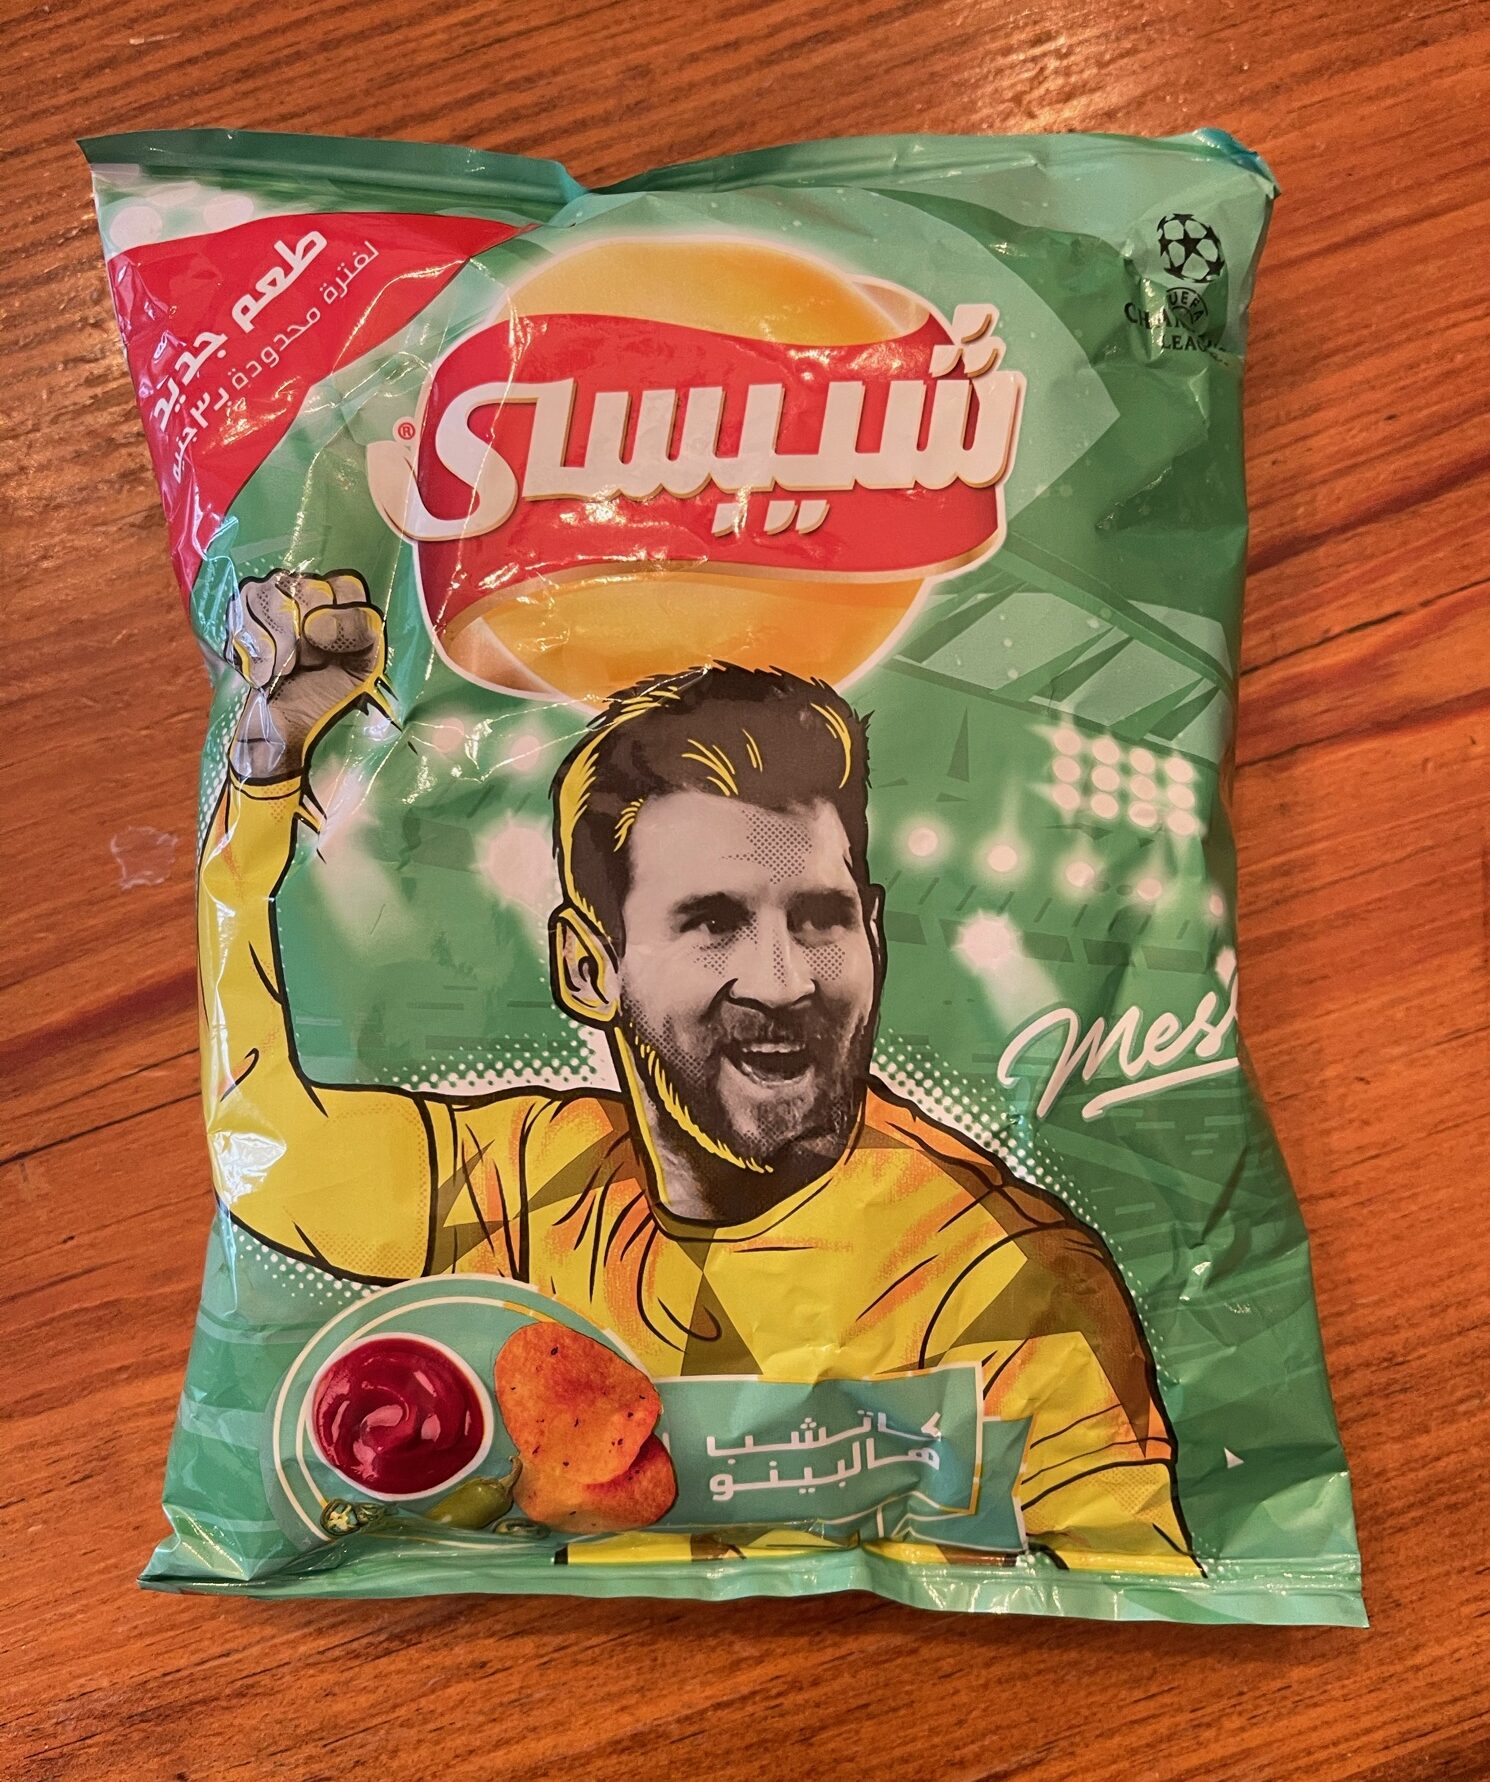 A bag of Jalapeno Ketchup Chips from Chipsy in Egypt with Messi on the front